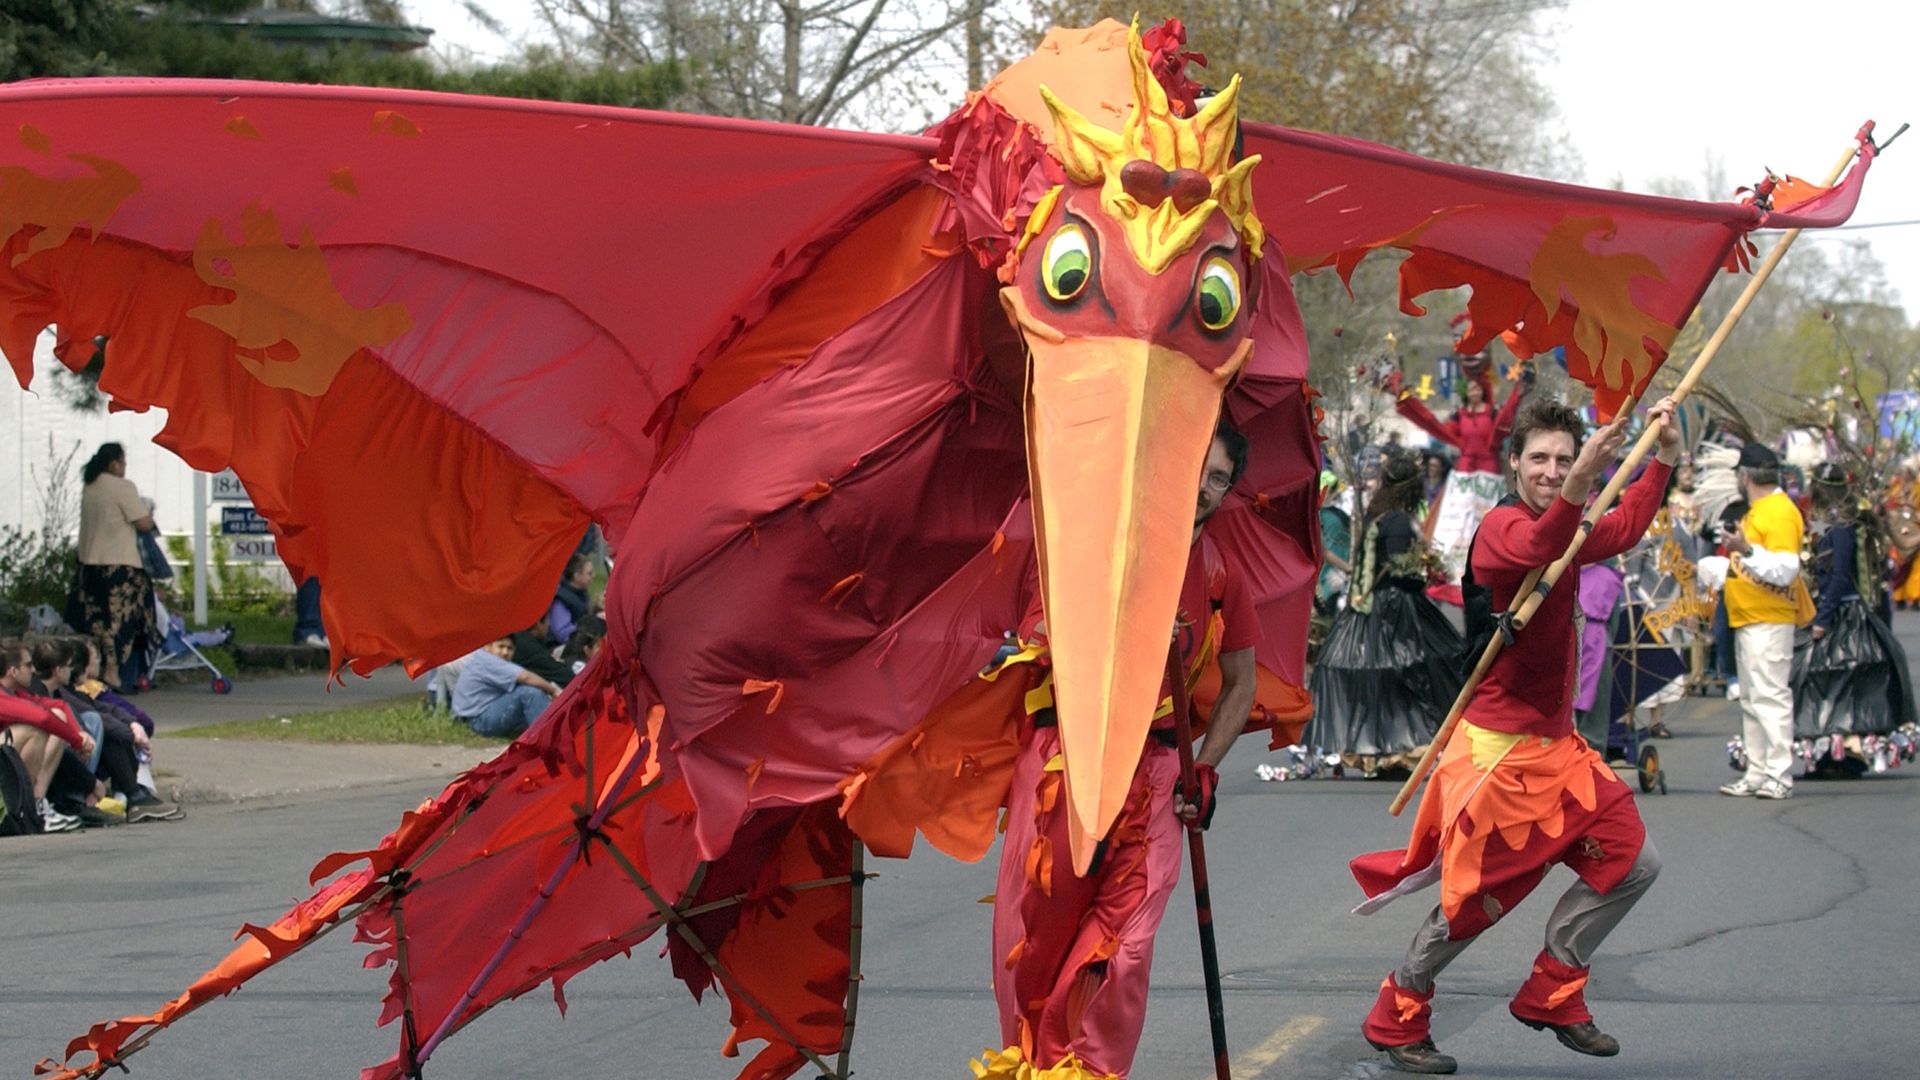 An enormous red bird puppet, which is as tall as an average man and at least 10 feet wide.